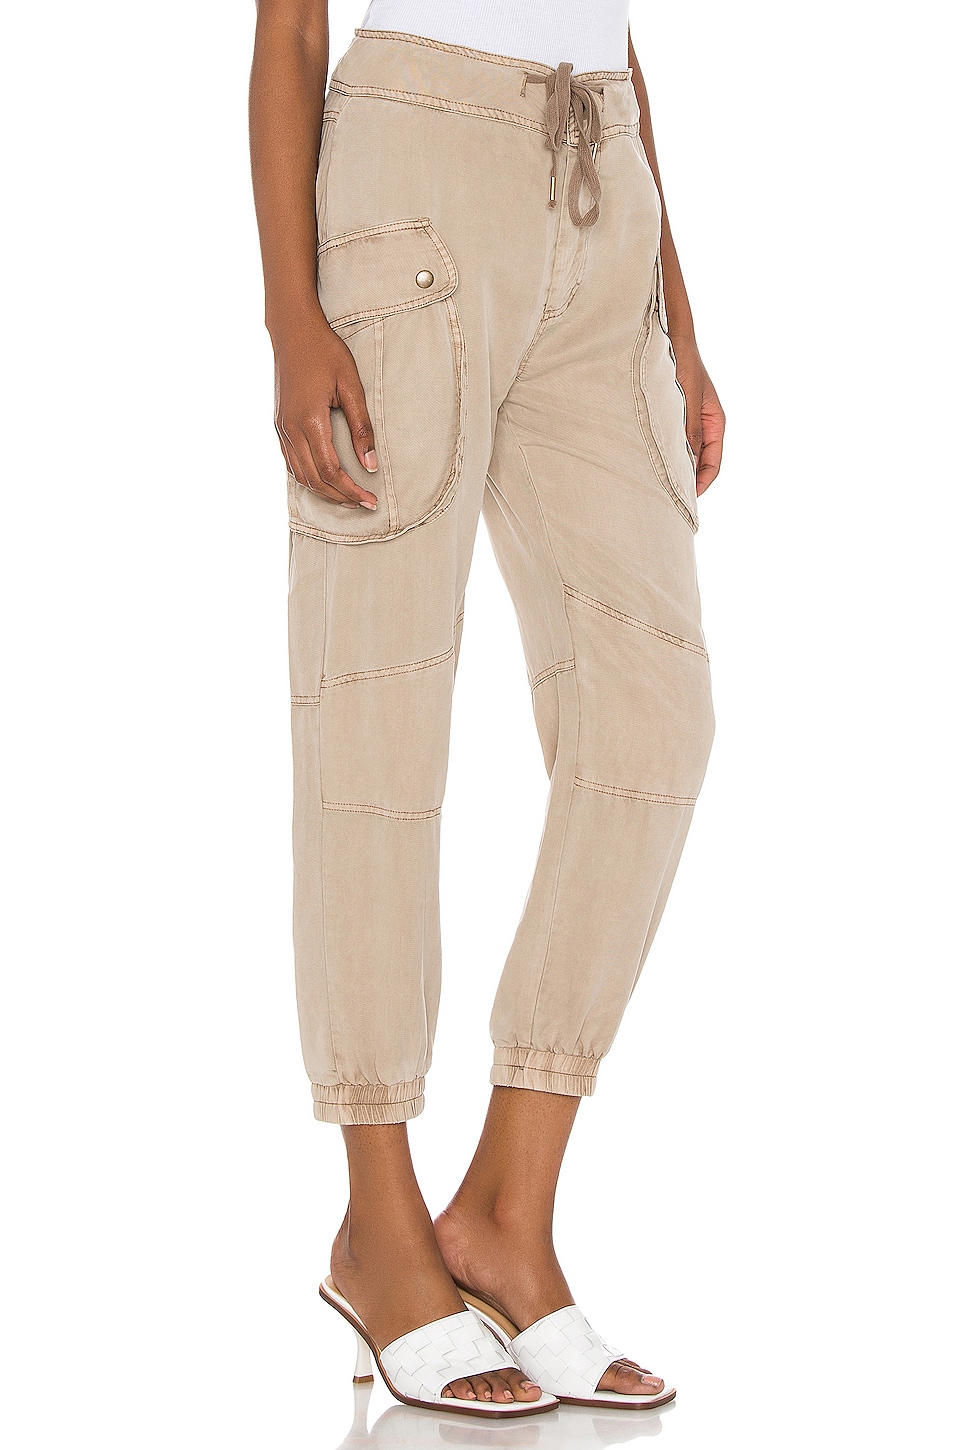 YFB CLOTHING Clyde Cargo Pant in Taupe Pigment | REVOLVE